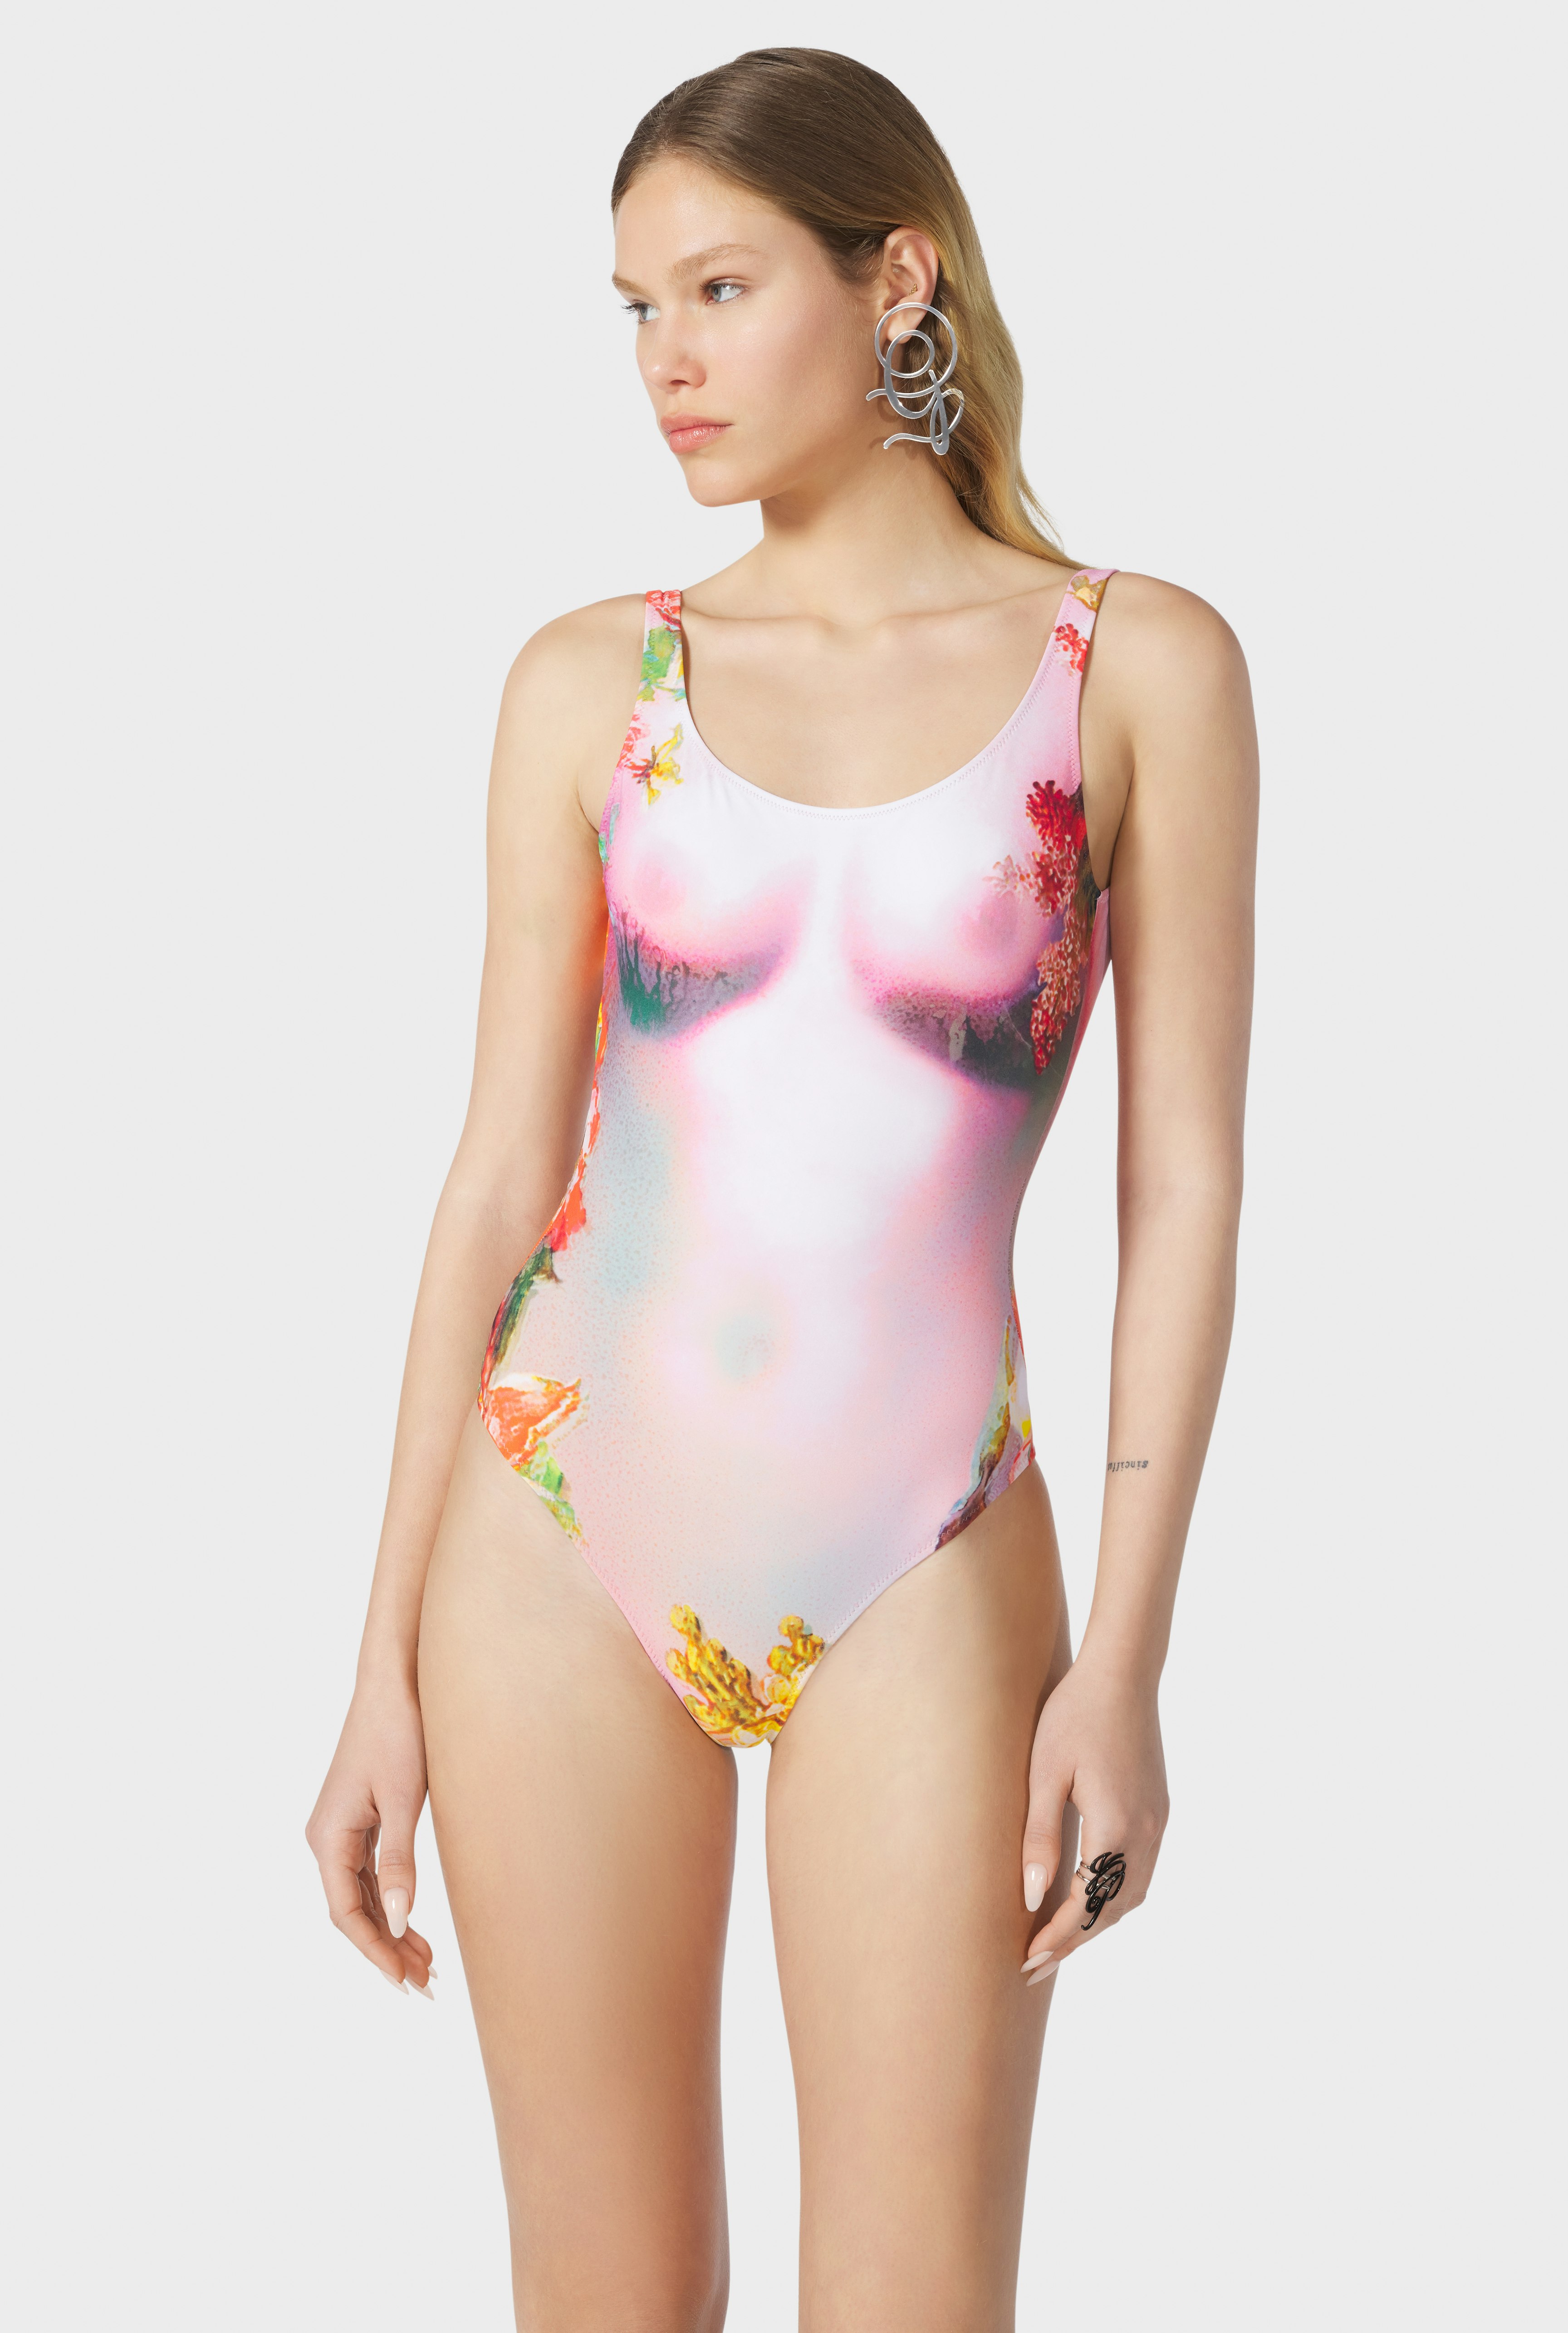 The Pink Body Flower Swimsuit hover